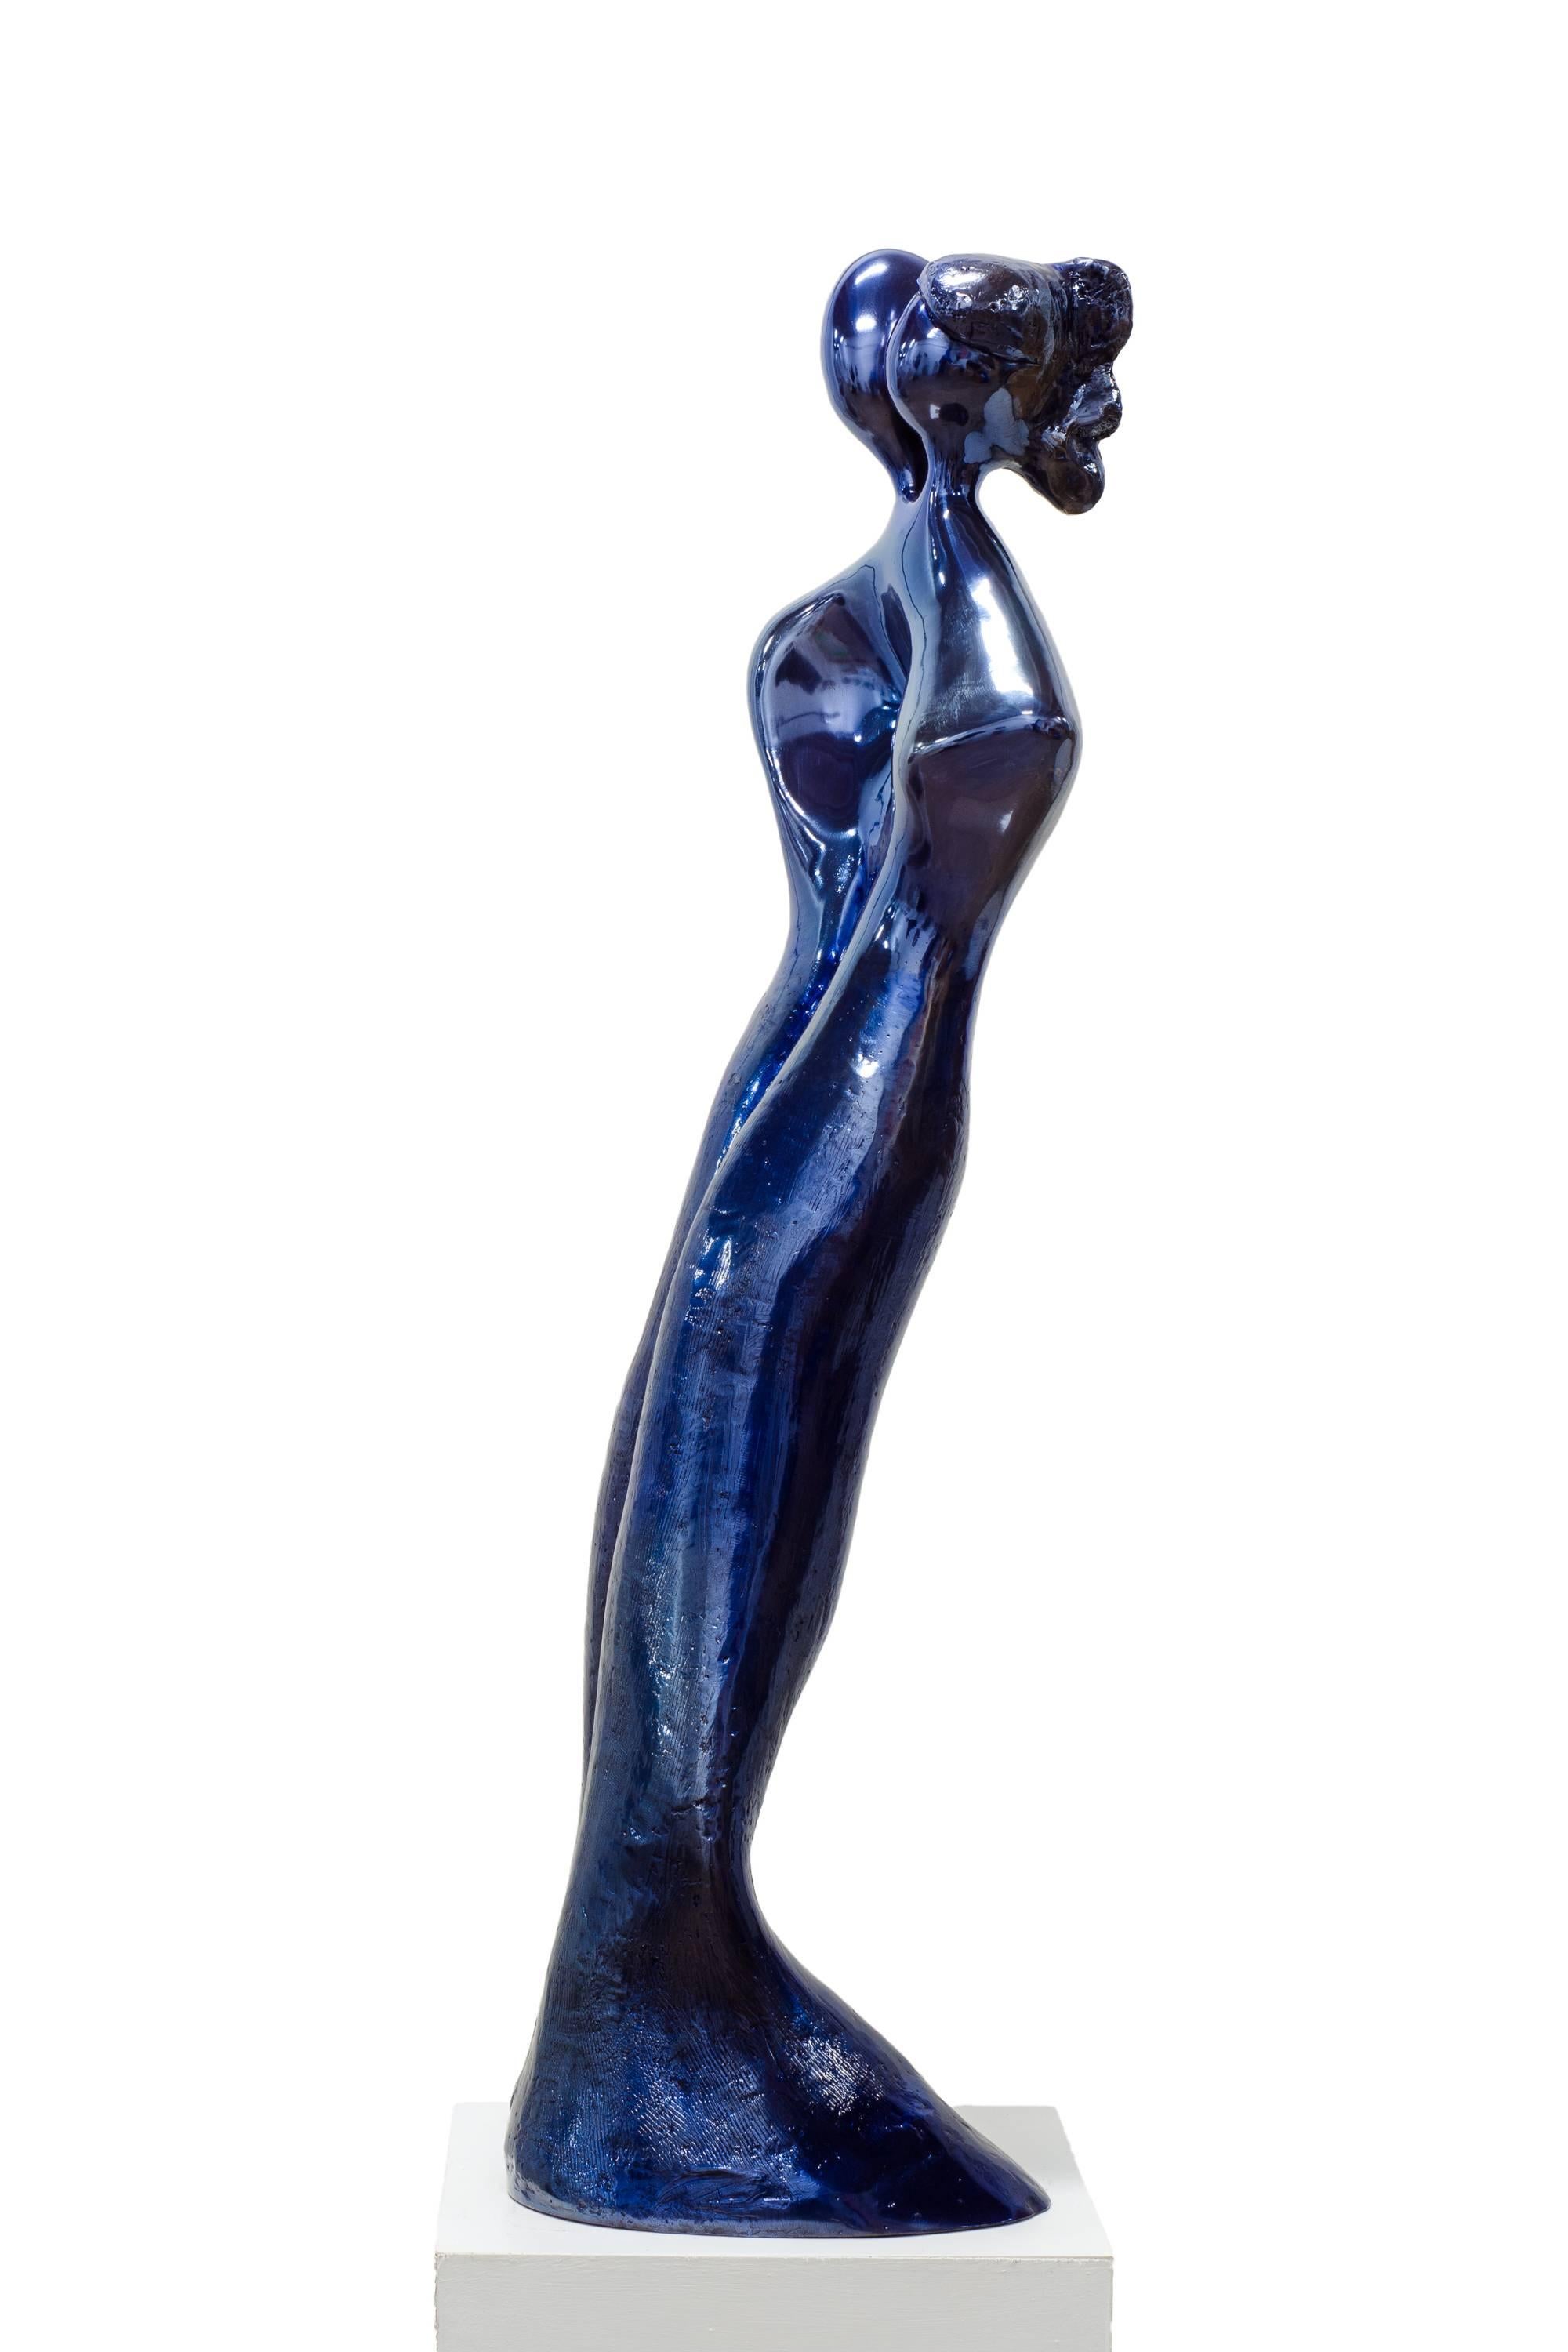 Soulmates #1 (in Blue). When In love, their souls and bodies fuse into just one - Abstract Sculpture by Beatriz Gerenstein